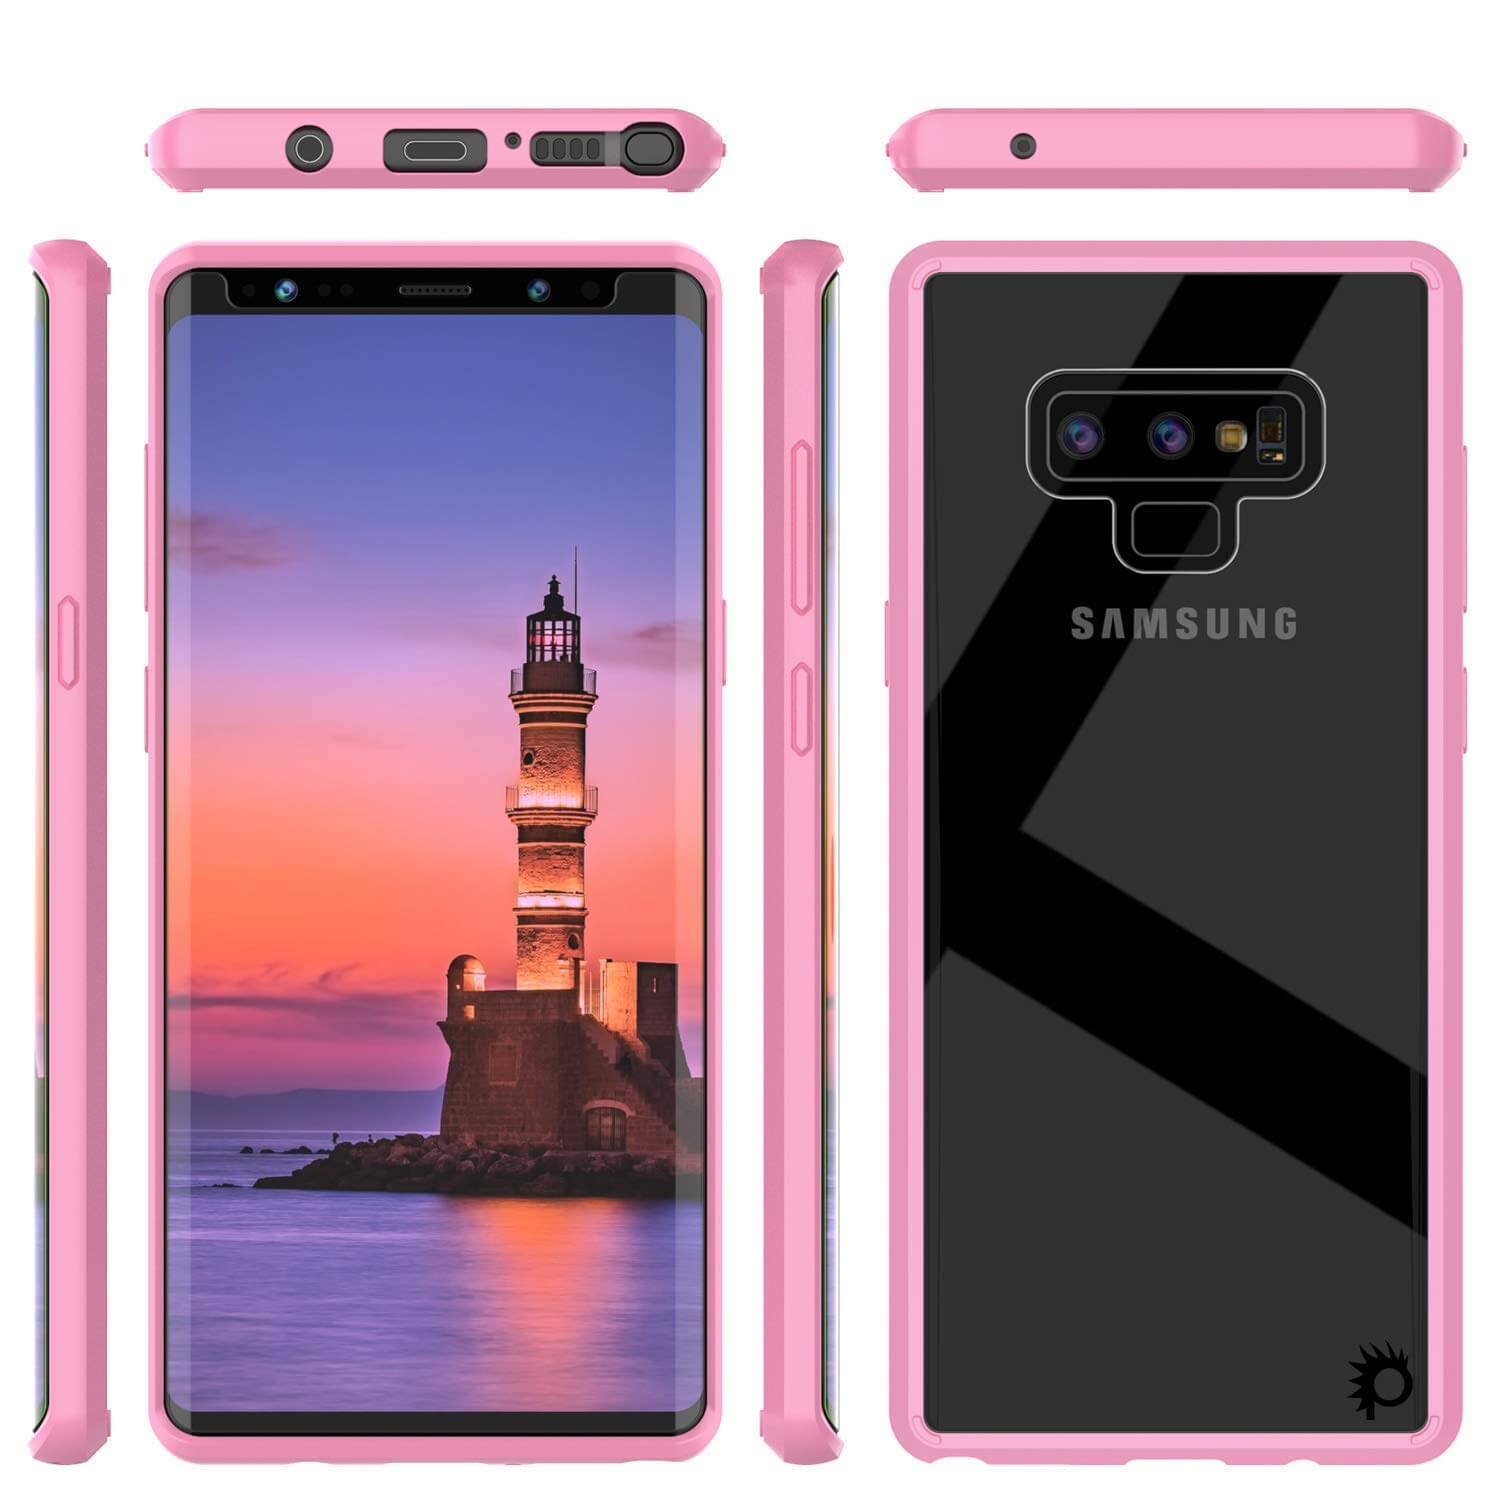 Galaxy Note 9 Punkcase Lucid-2.0 Series Slim Fit Armor Pink Case Cover